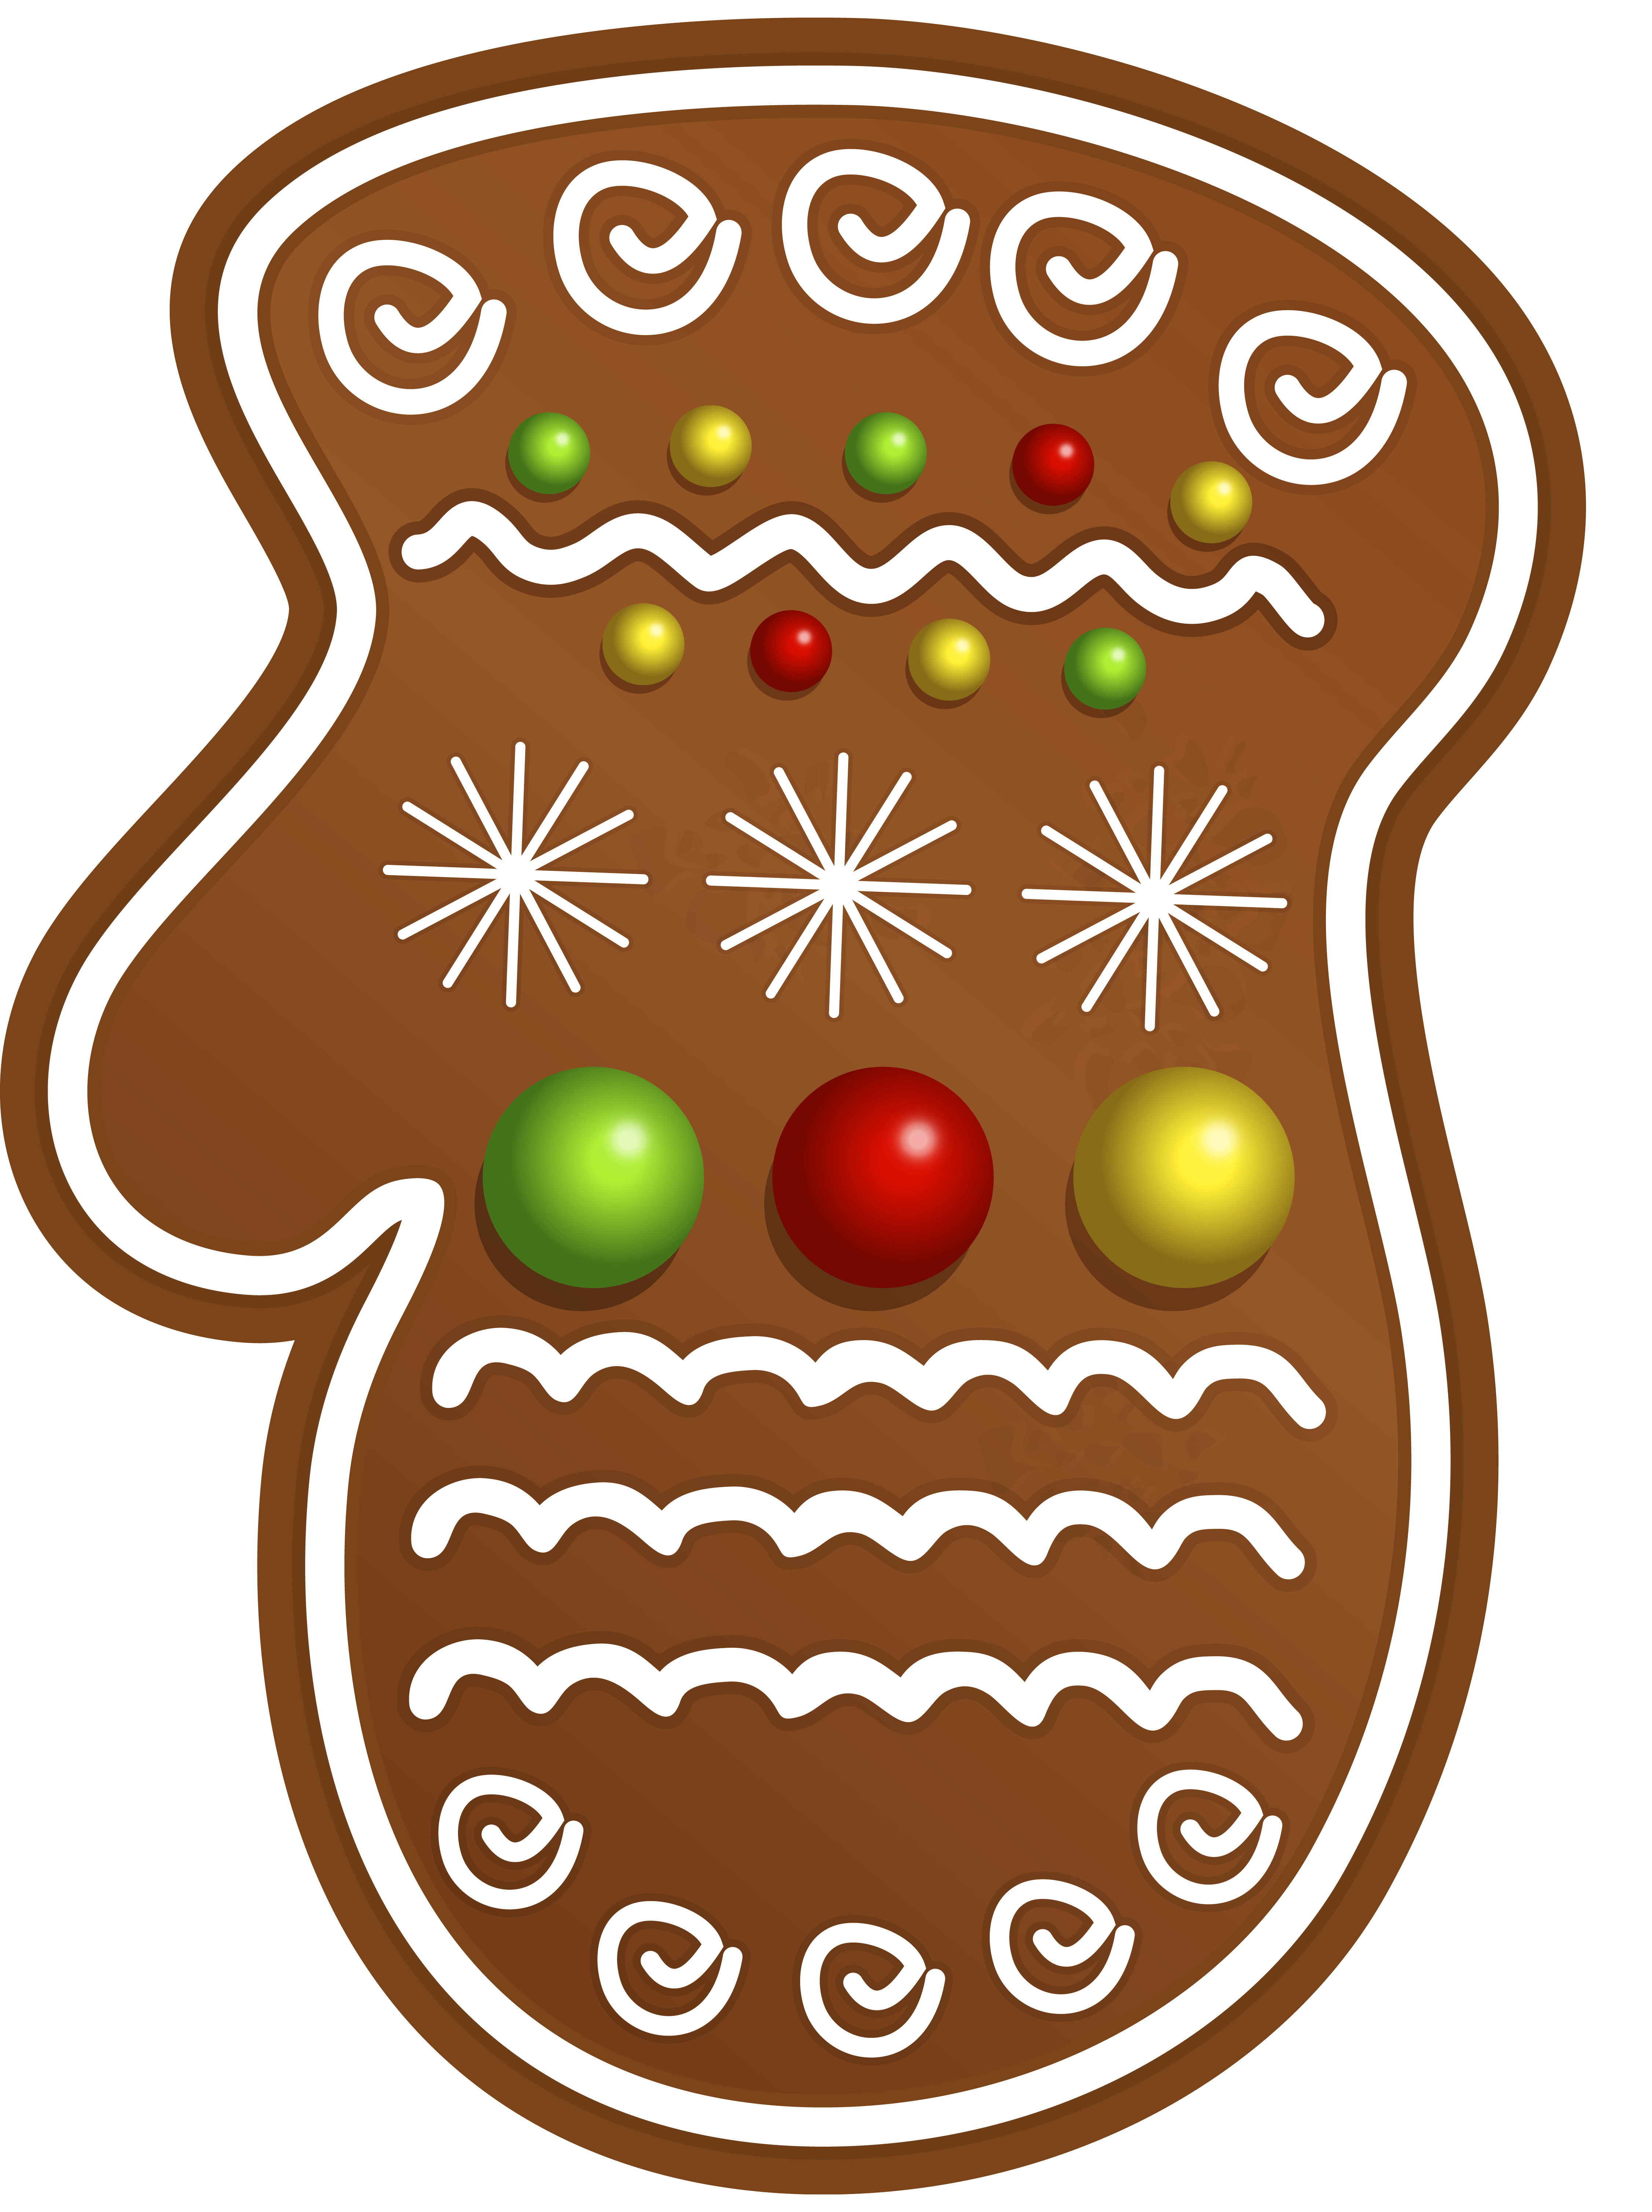 Glove clipart file. Christmas cookies free incep